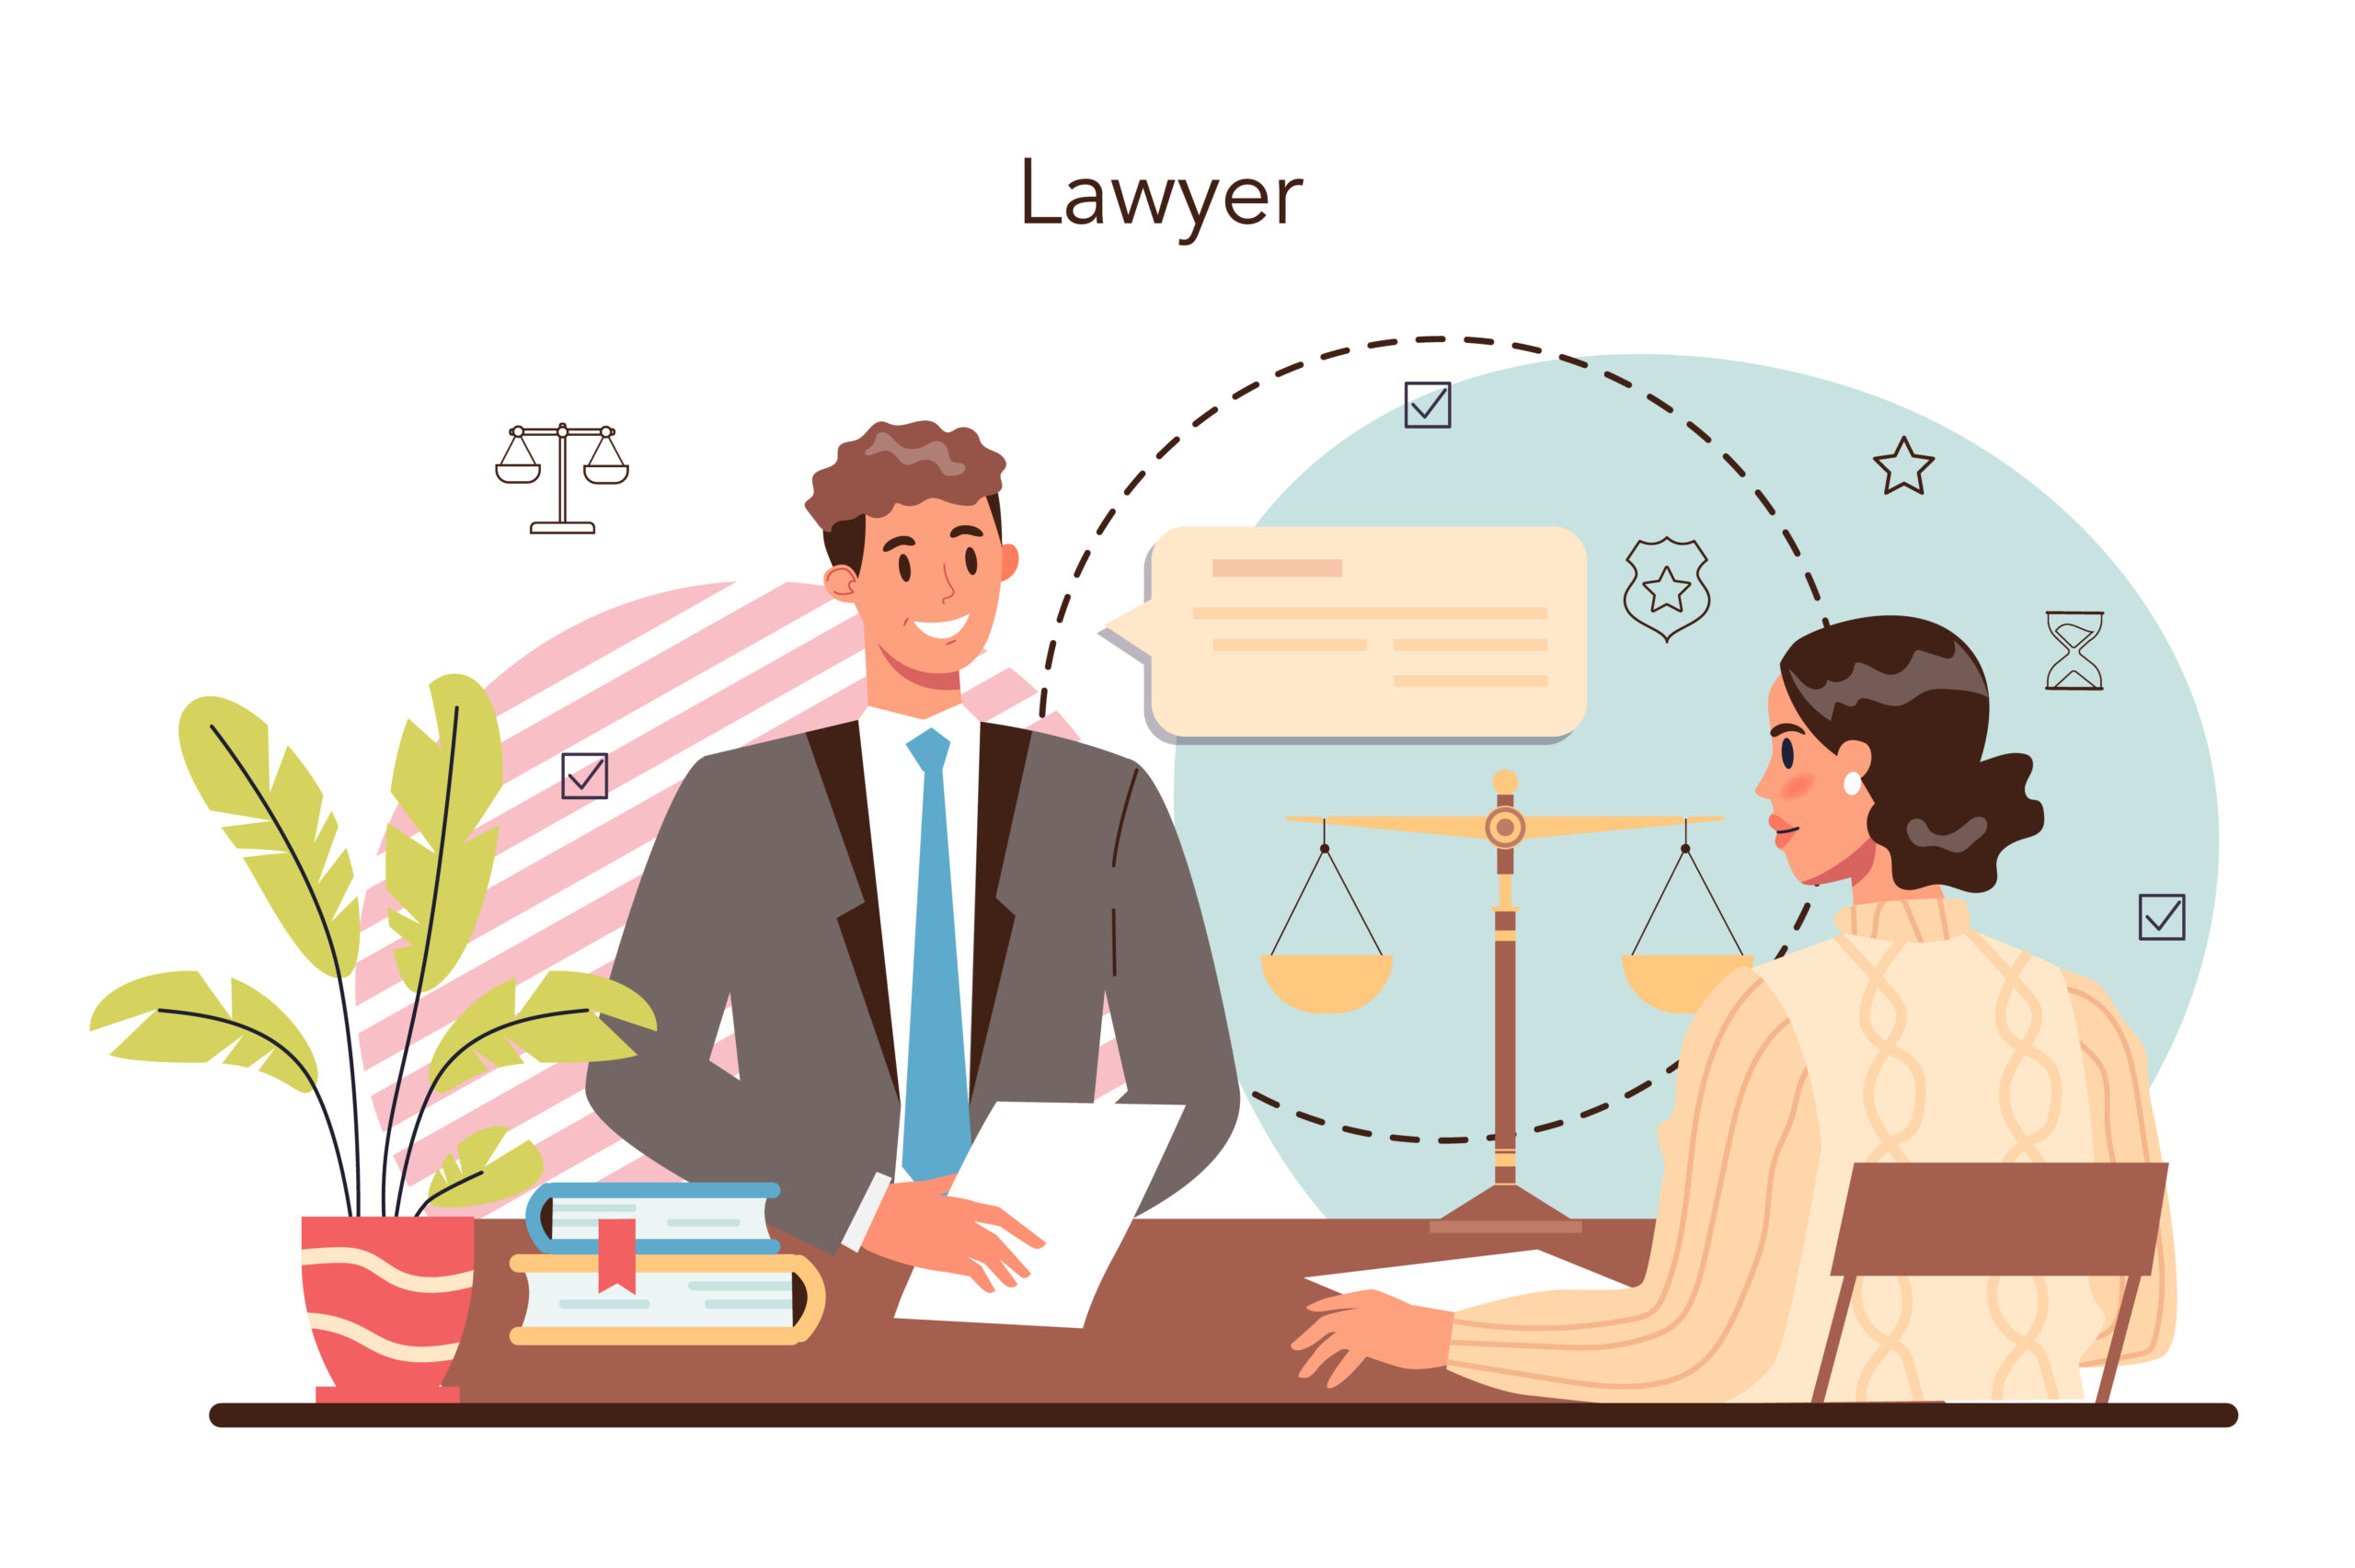 LEGAL AND JUDICIAL ETHICS FOR LAWYERS, JUDGES AND PARALEGALS